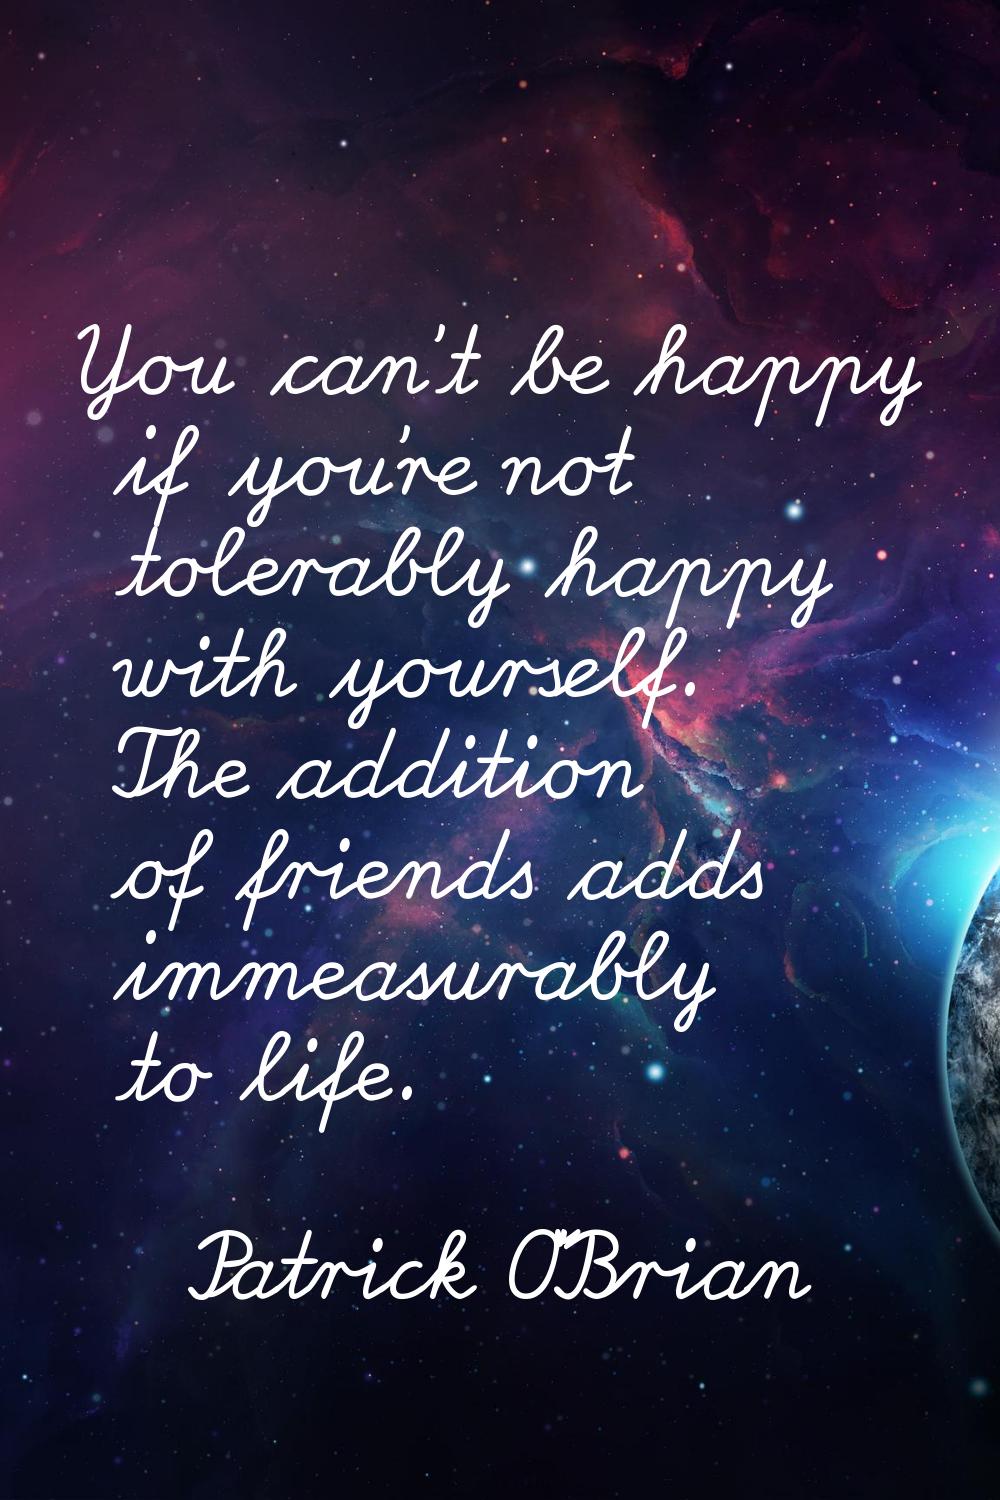 You can't be happy if you're not tolerably happy with yourself. The addition of friends adds immeas